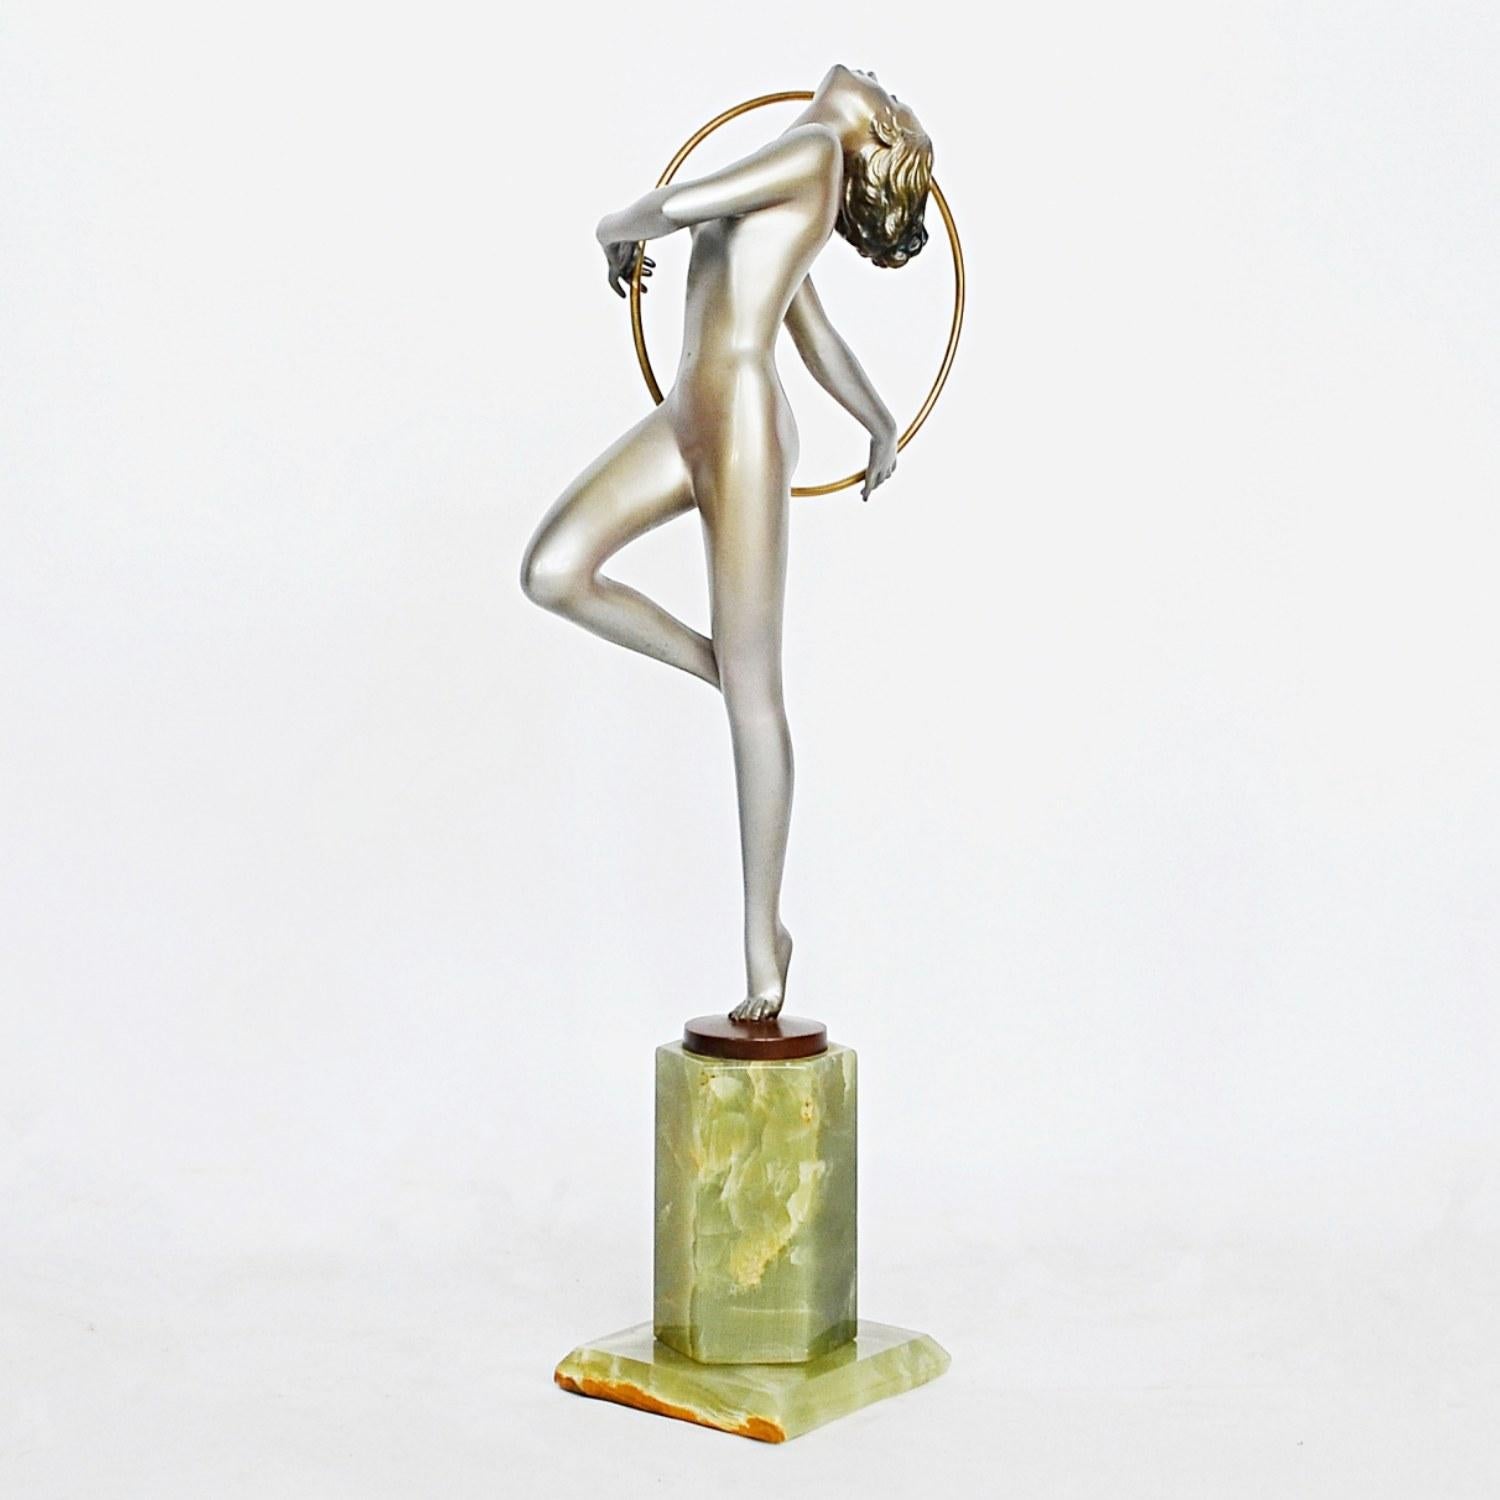 Hoop dancer, a large Art Deco, cold painted silvered bronze figure by Josef Lorenzl (1892-1950). A dancing woman in stylized pose holding a golden hoop, set over a green onyx plinth. Signed Lorenzl to bronze

Excellent original